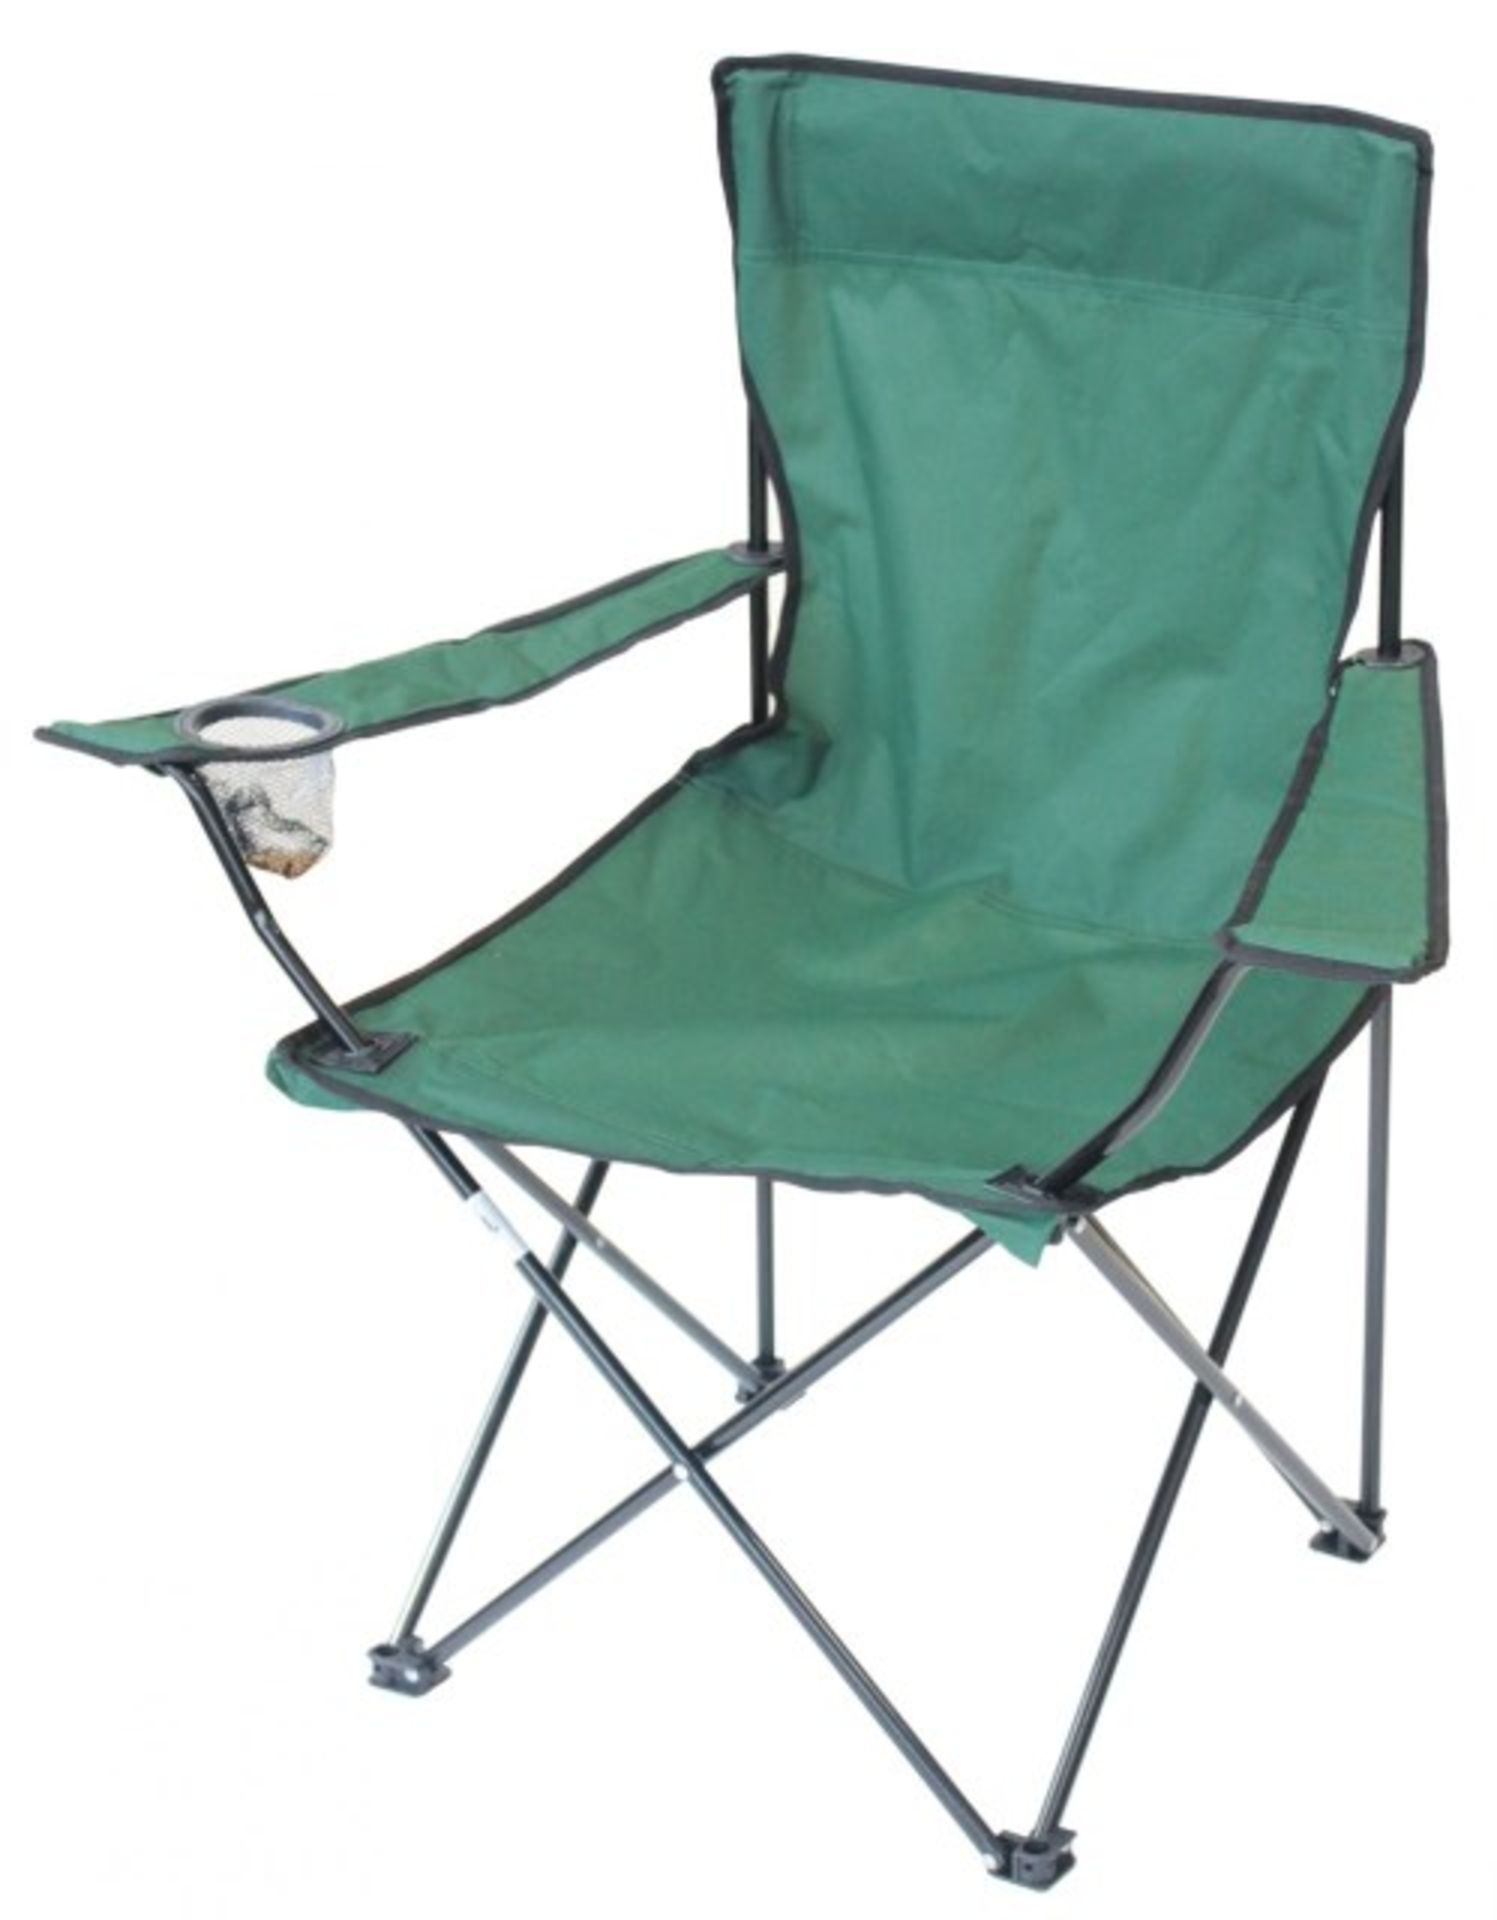 V *TRADE QTY* Brand New Folding Outdoor Chair with Cup Holder RRP £15 (similar Millets) X 6 Bid